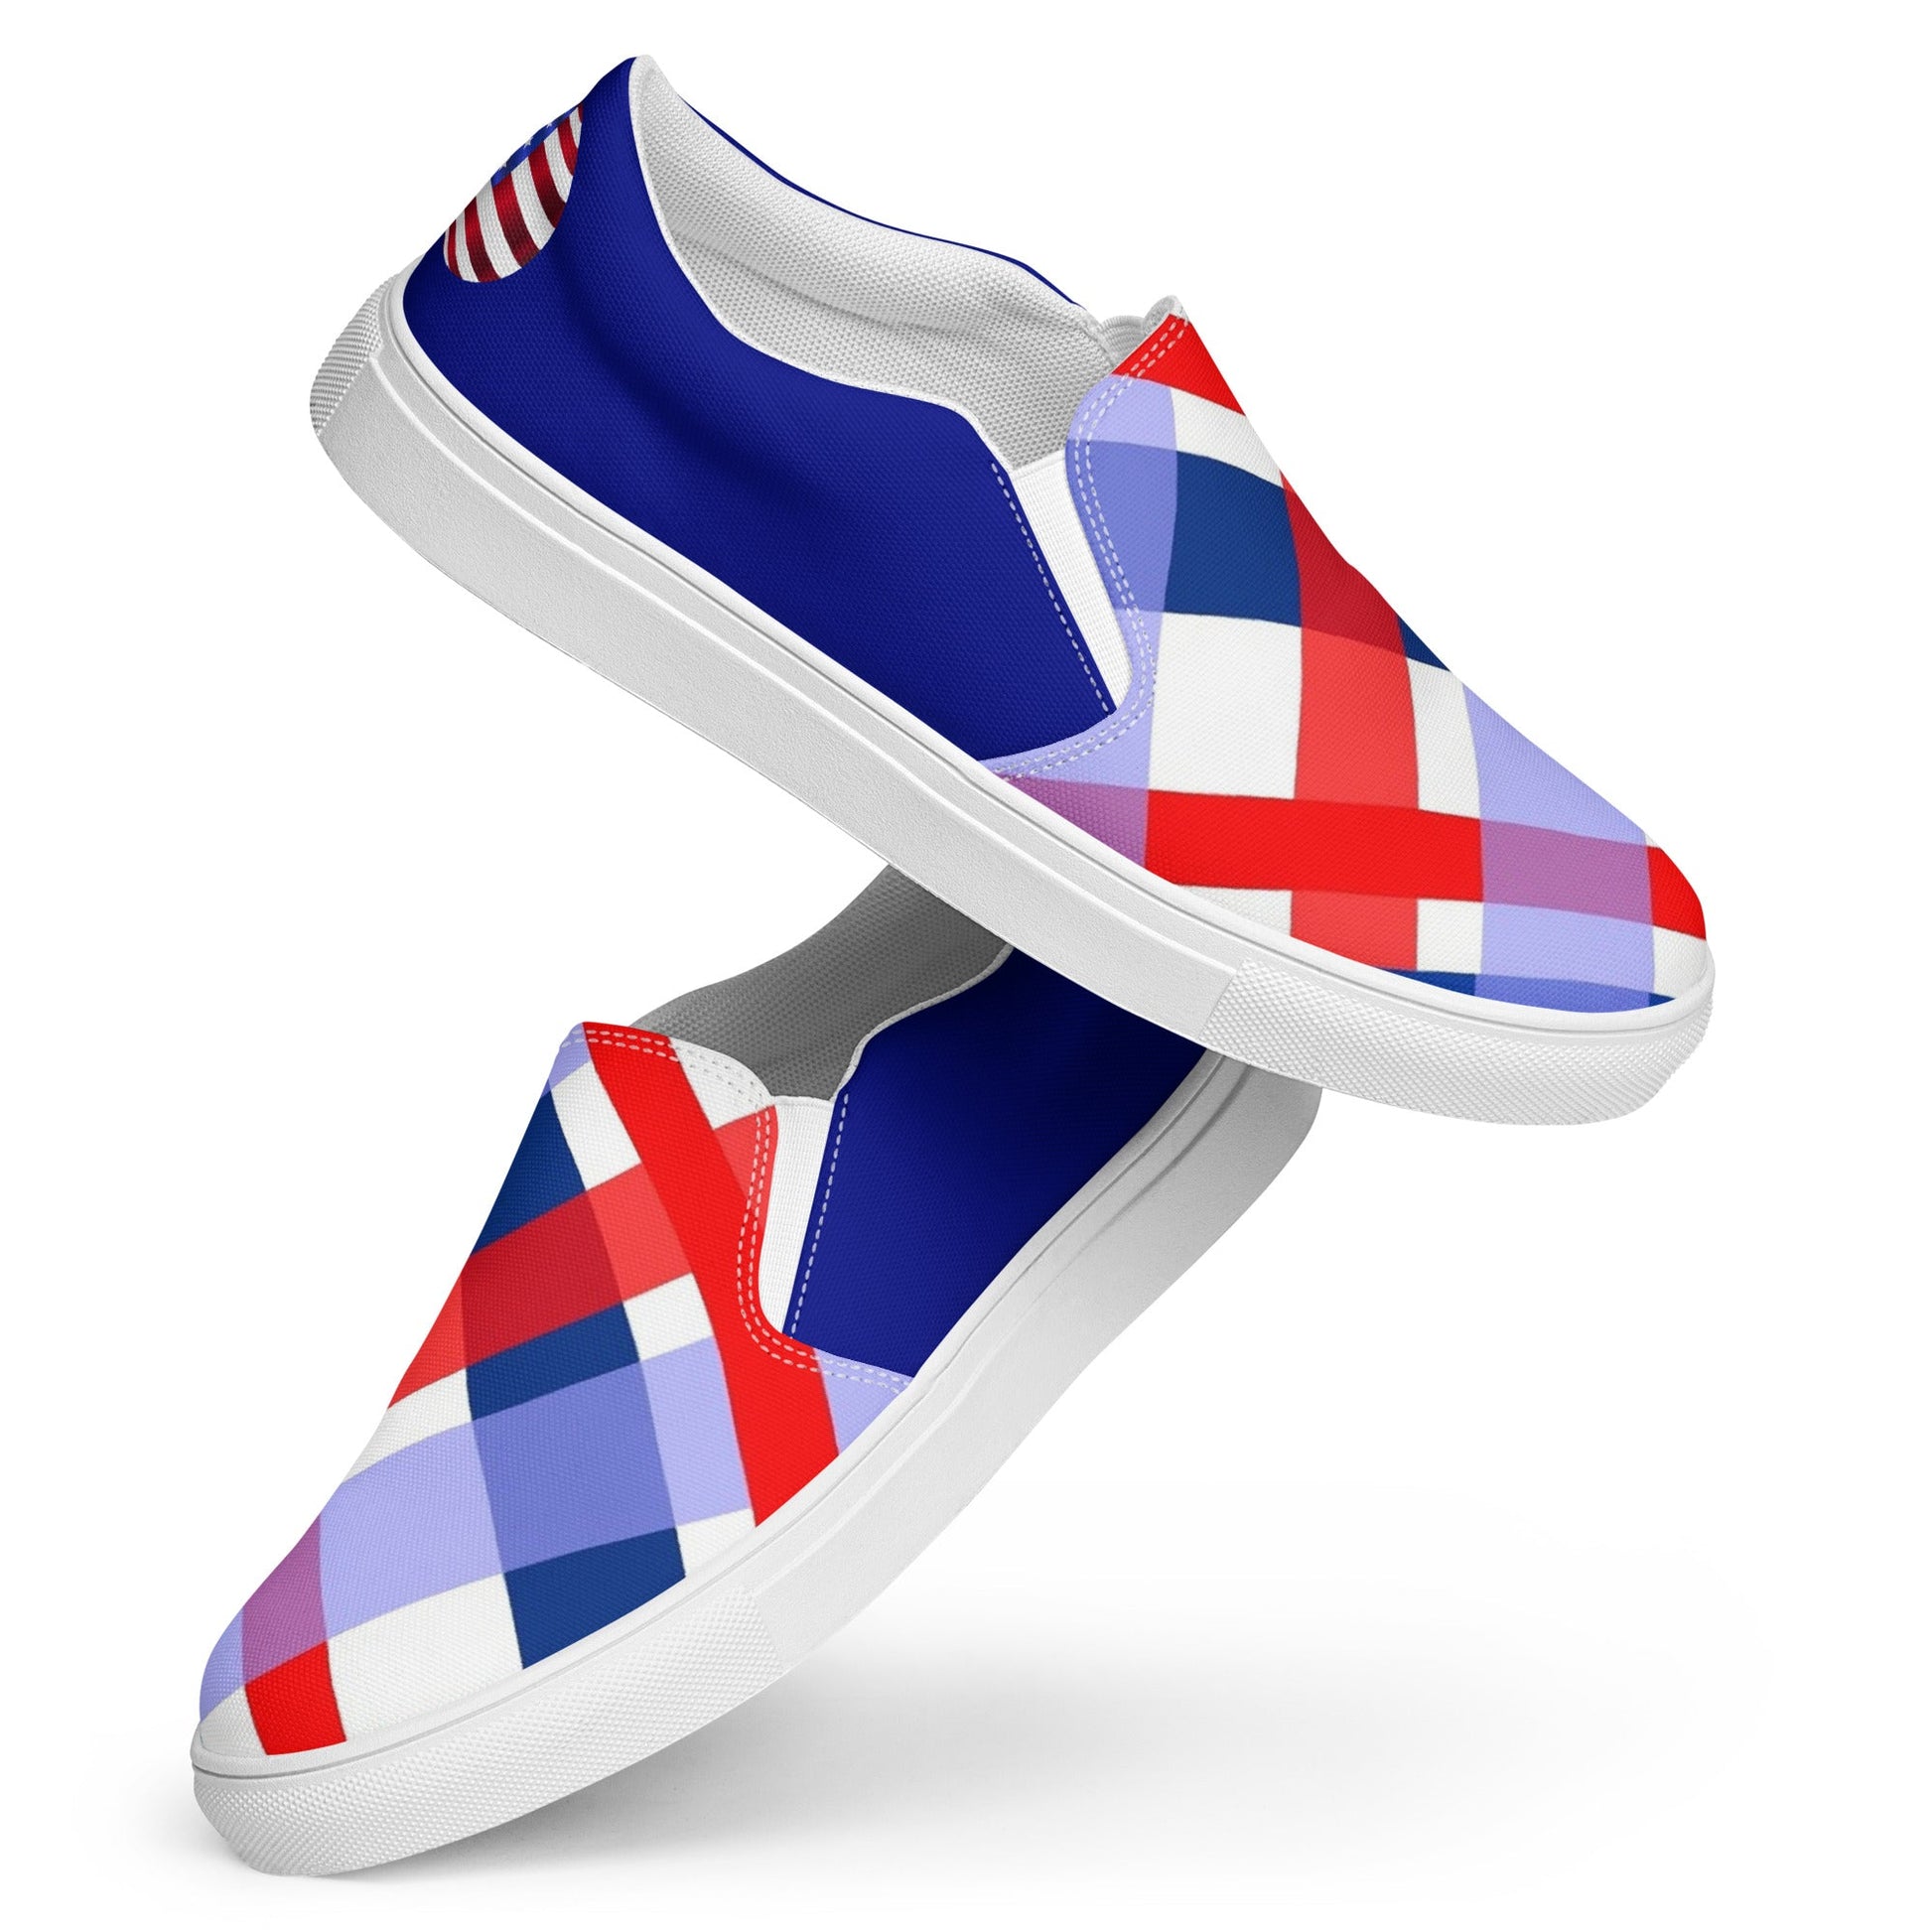 4th of July men's slip-on canvas shoes